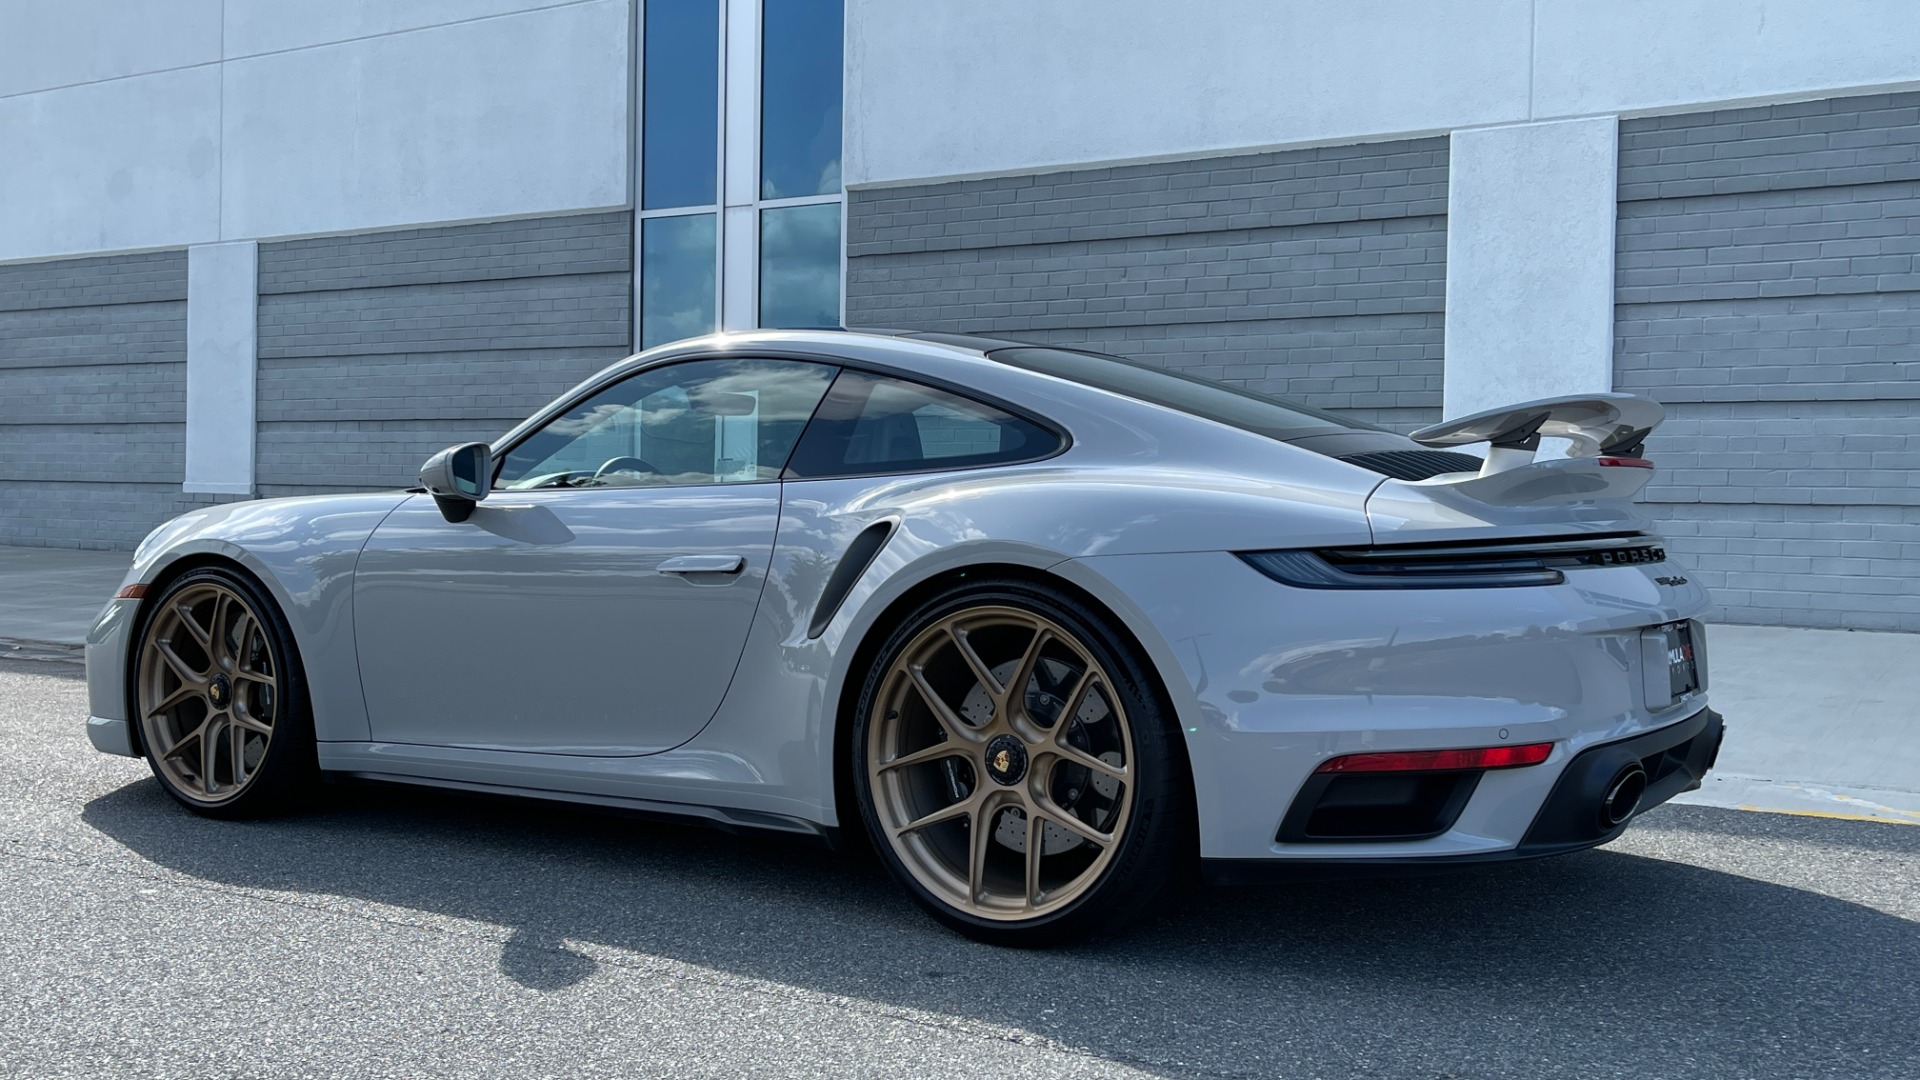 Used 2021 Porsche 911 Turbo S / HRE WHEELS / FRONT LIFT / MATRIX LIGHTS / PASM SUSPENSION for sale Sold at Formula Imports in Charlotte NC 28227 10